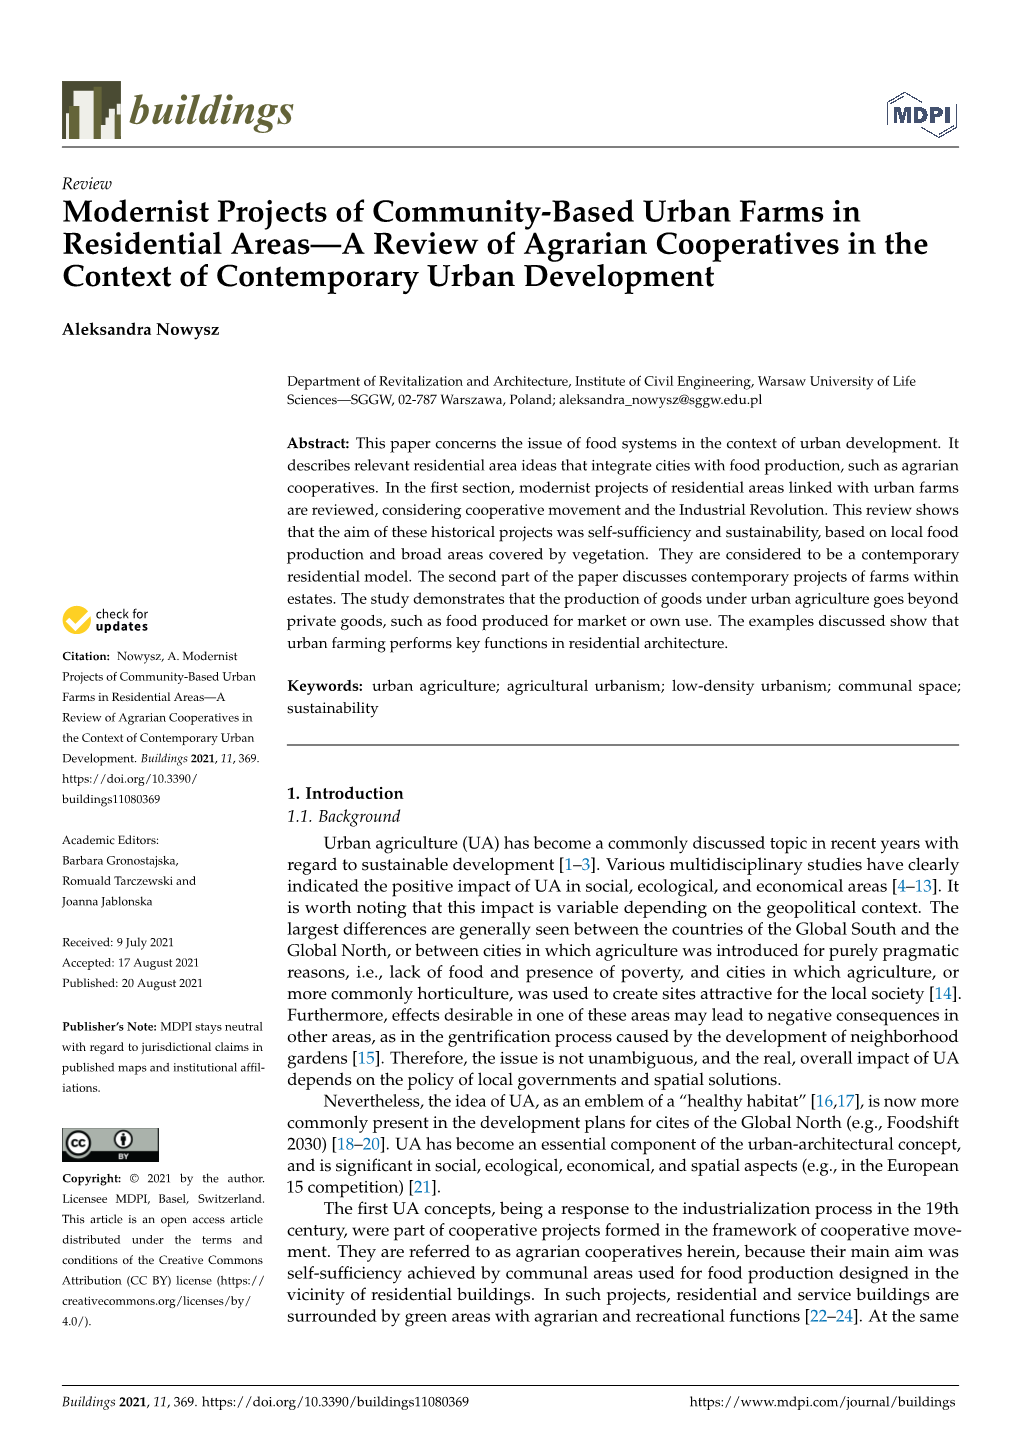 Modernist Projects of Community-Based Urban Farms in Residential Areas—A Review of Agrarian Cooperatives in the Context of Contemporary Urban Development